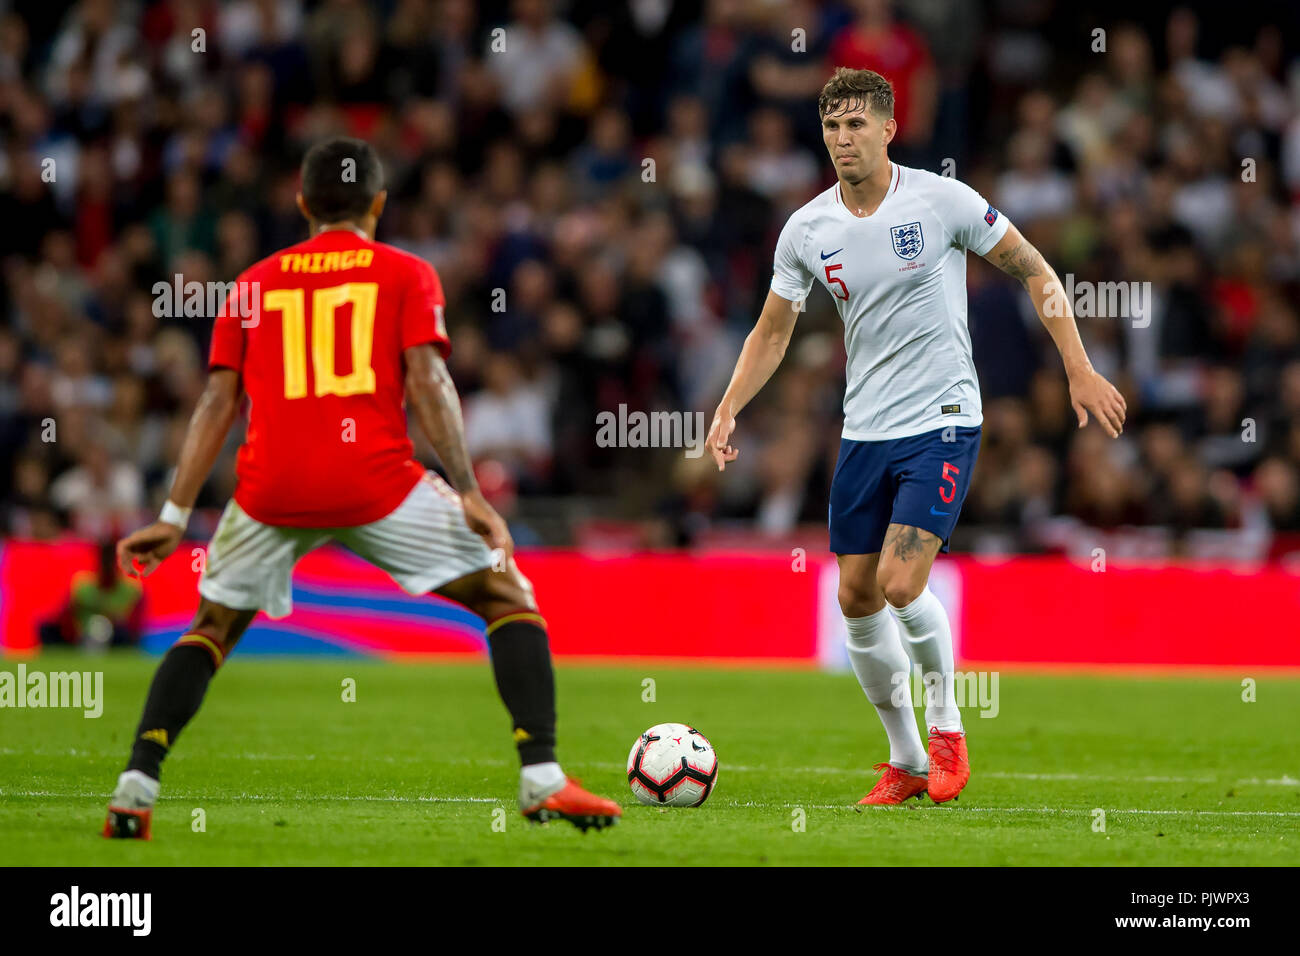 London, UK. 8th September 2018. John Stones of England during the UEFA Nation League, Group 4, League A match between England and Spain at Wembley Stadium, London, England on 8 September 2018. 8th Sep, 2018. Photo by Salvio Calabrese Credit: AFP7/ZUMA Wire/Alamy Live News Stock Photo